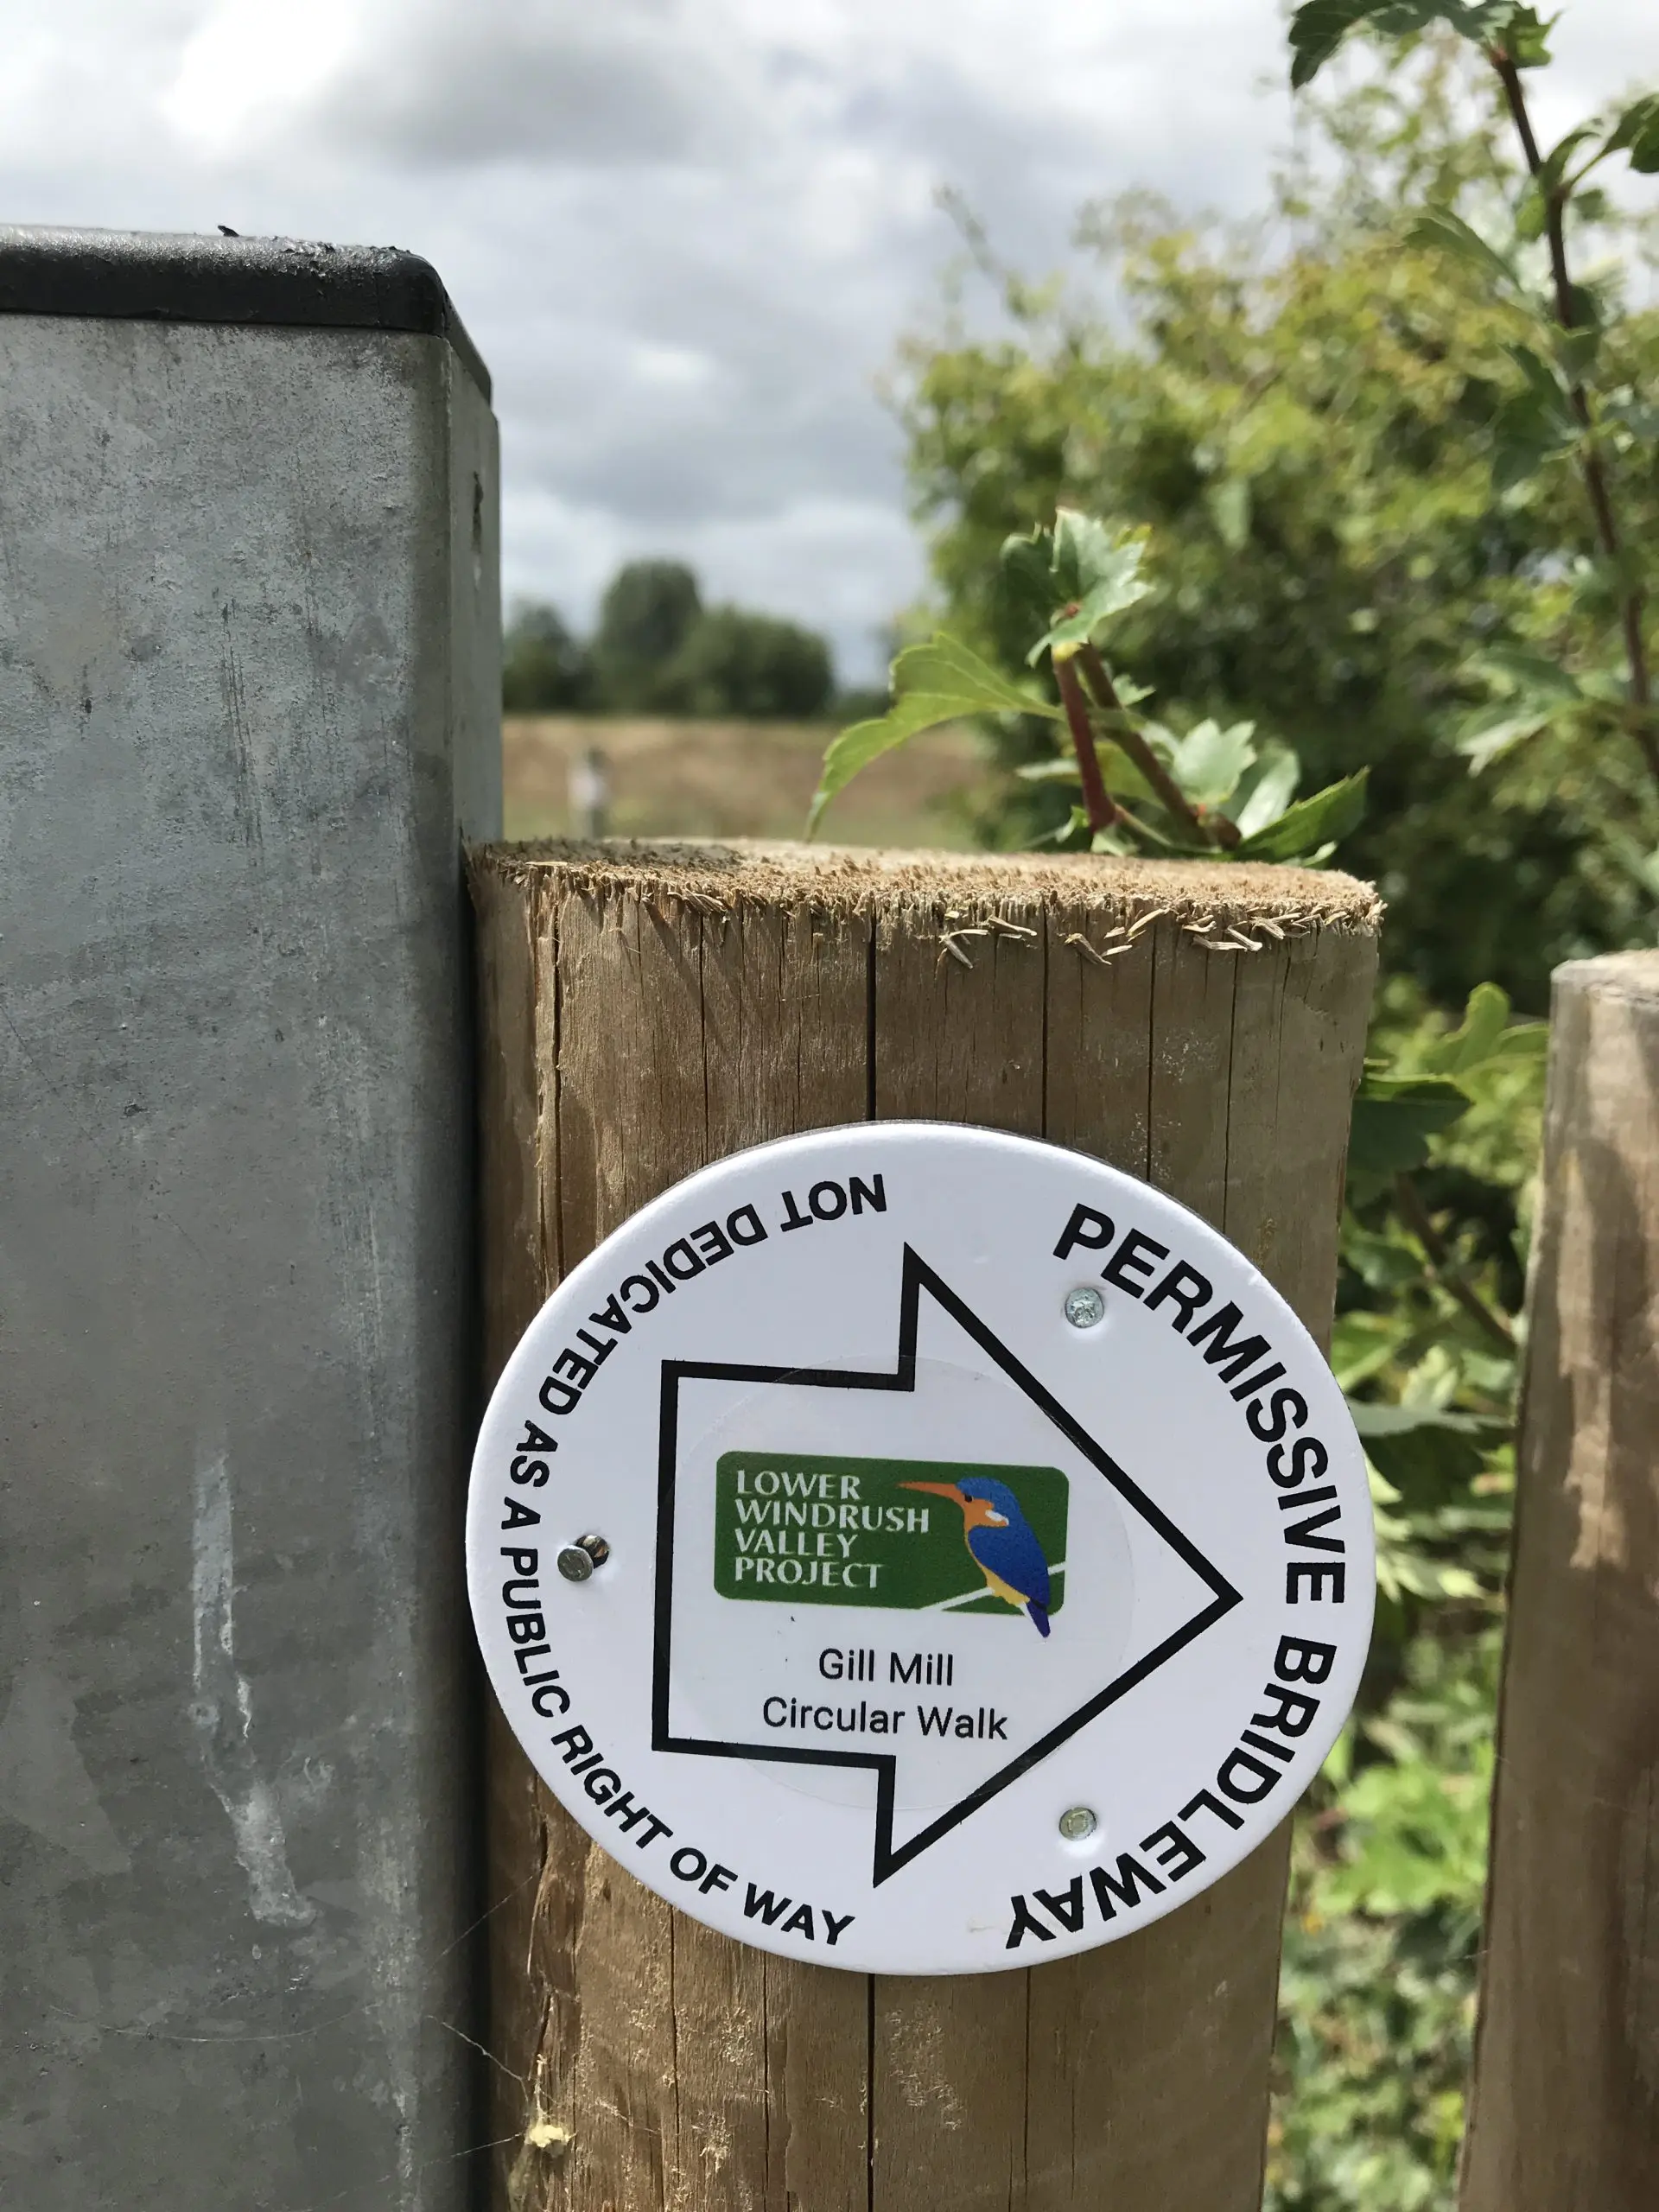 Stickers on waymarkers make it easy for walkers to follow the routes